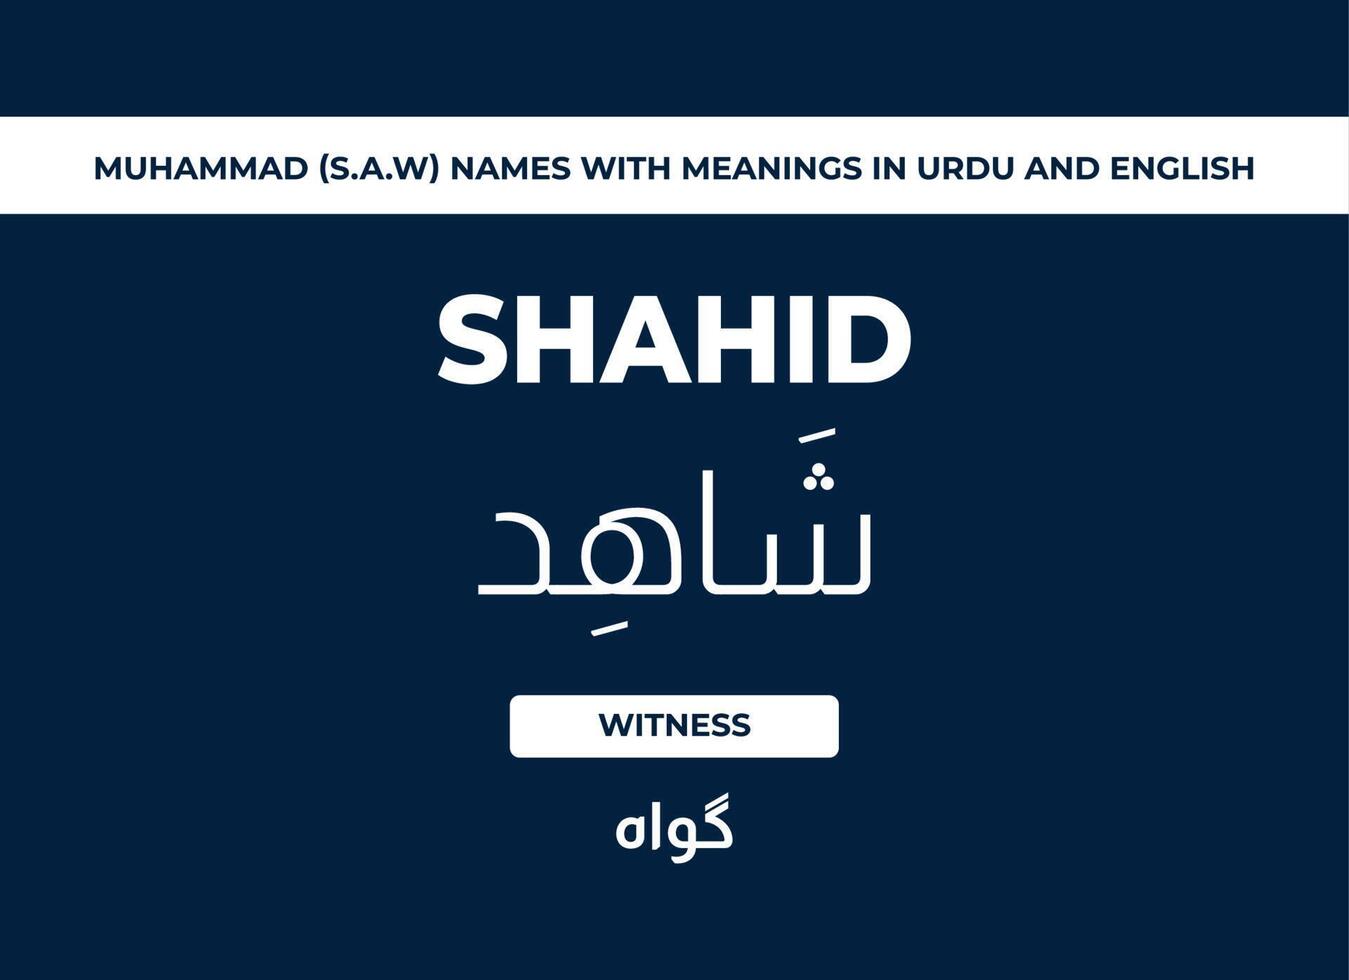 Mohammed S.A.W Names with Meanings in Urdu and English vector